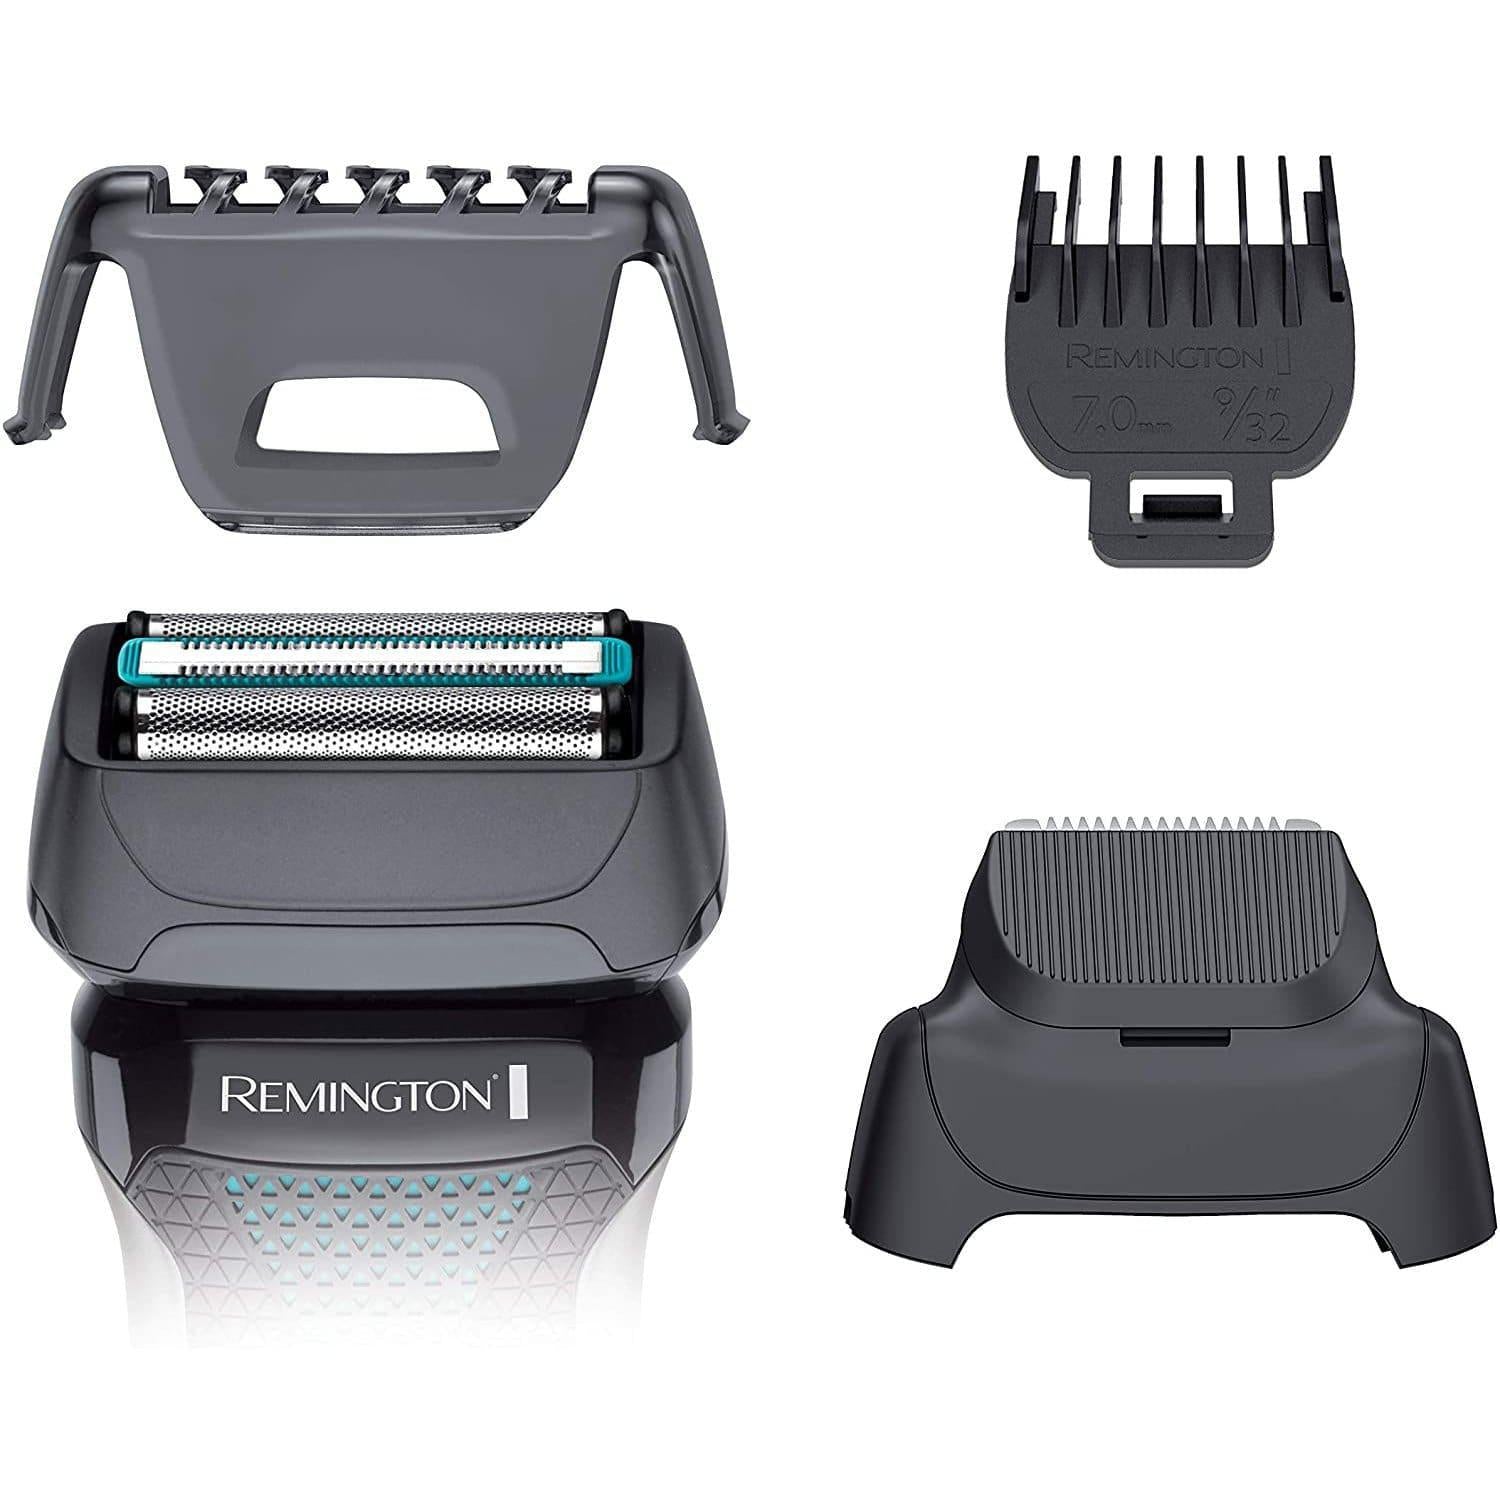 Remington F5000 Men's F5 Style Series Electric Shaver with Pop Up Trimmer, Black - Healthxpress.ie